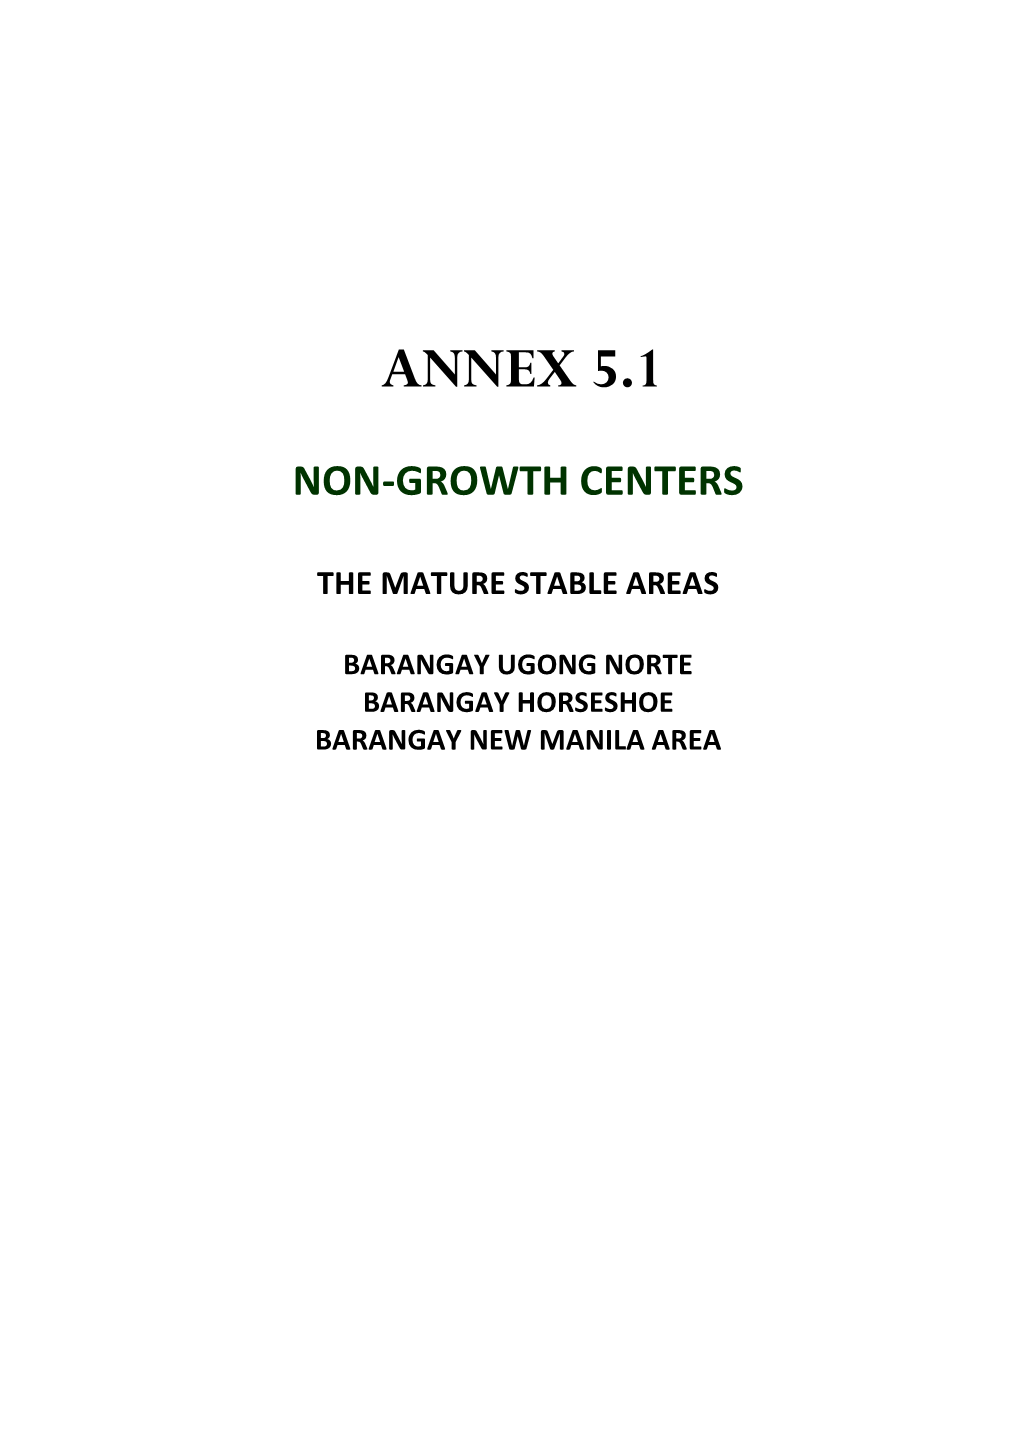 5.1 – Non-Growth Centers